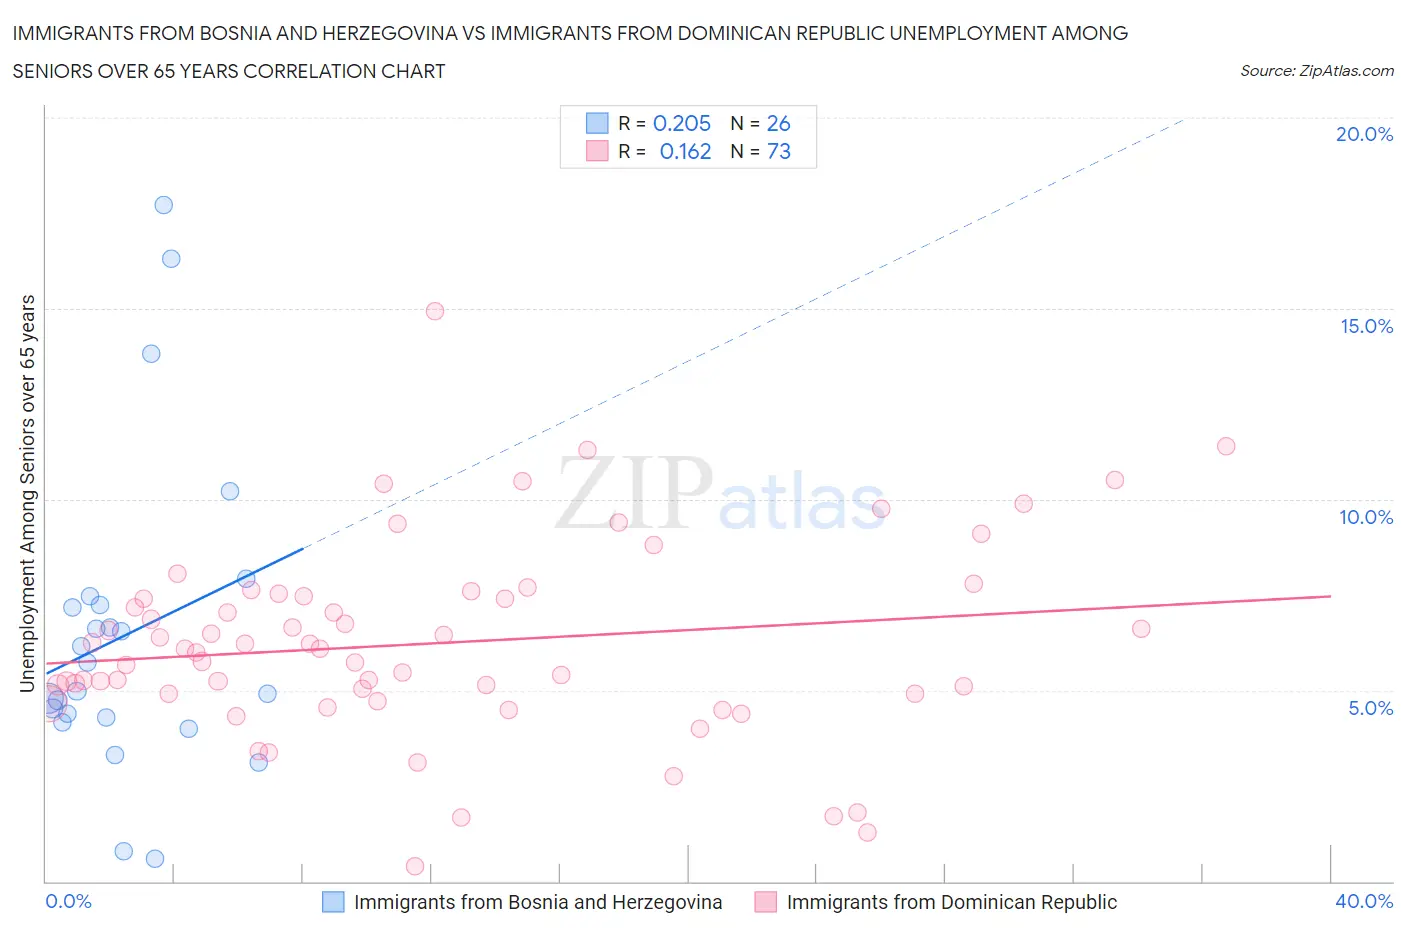 Immigrants from Bosnia and Herzegovina vs Immigrants from Dominican Republic Unemployment Among Seniors over 65 years